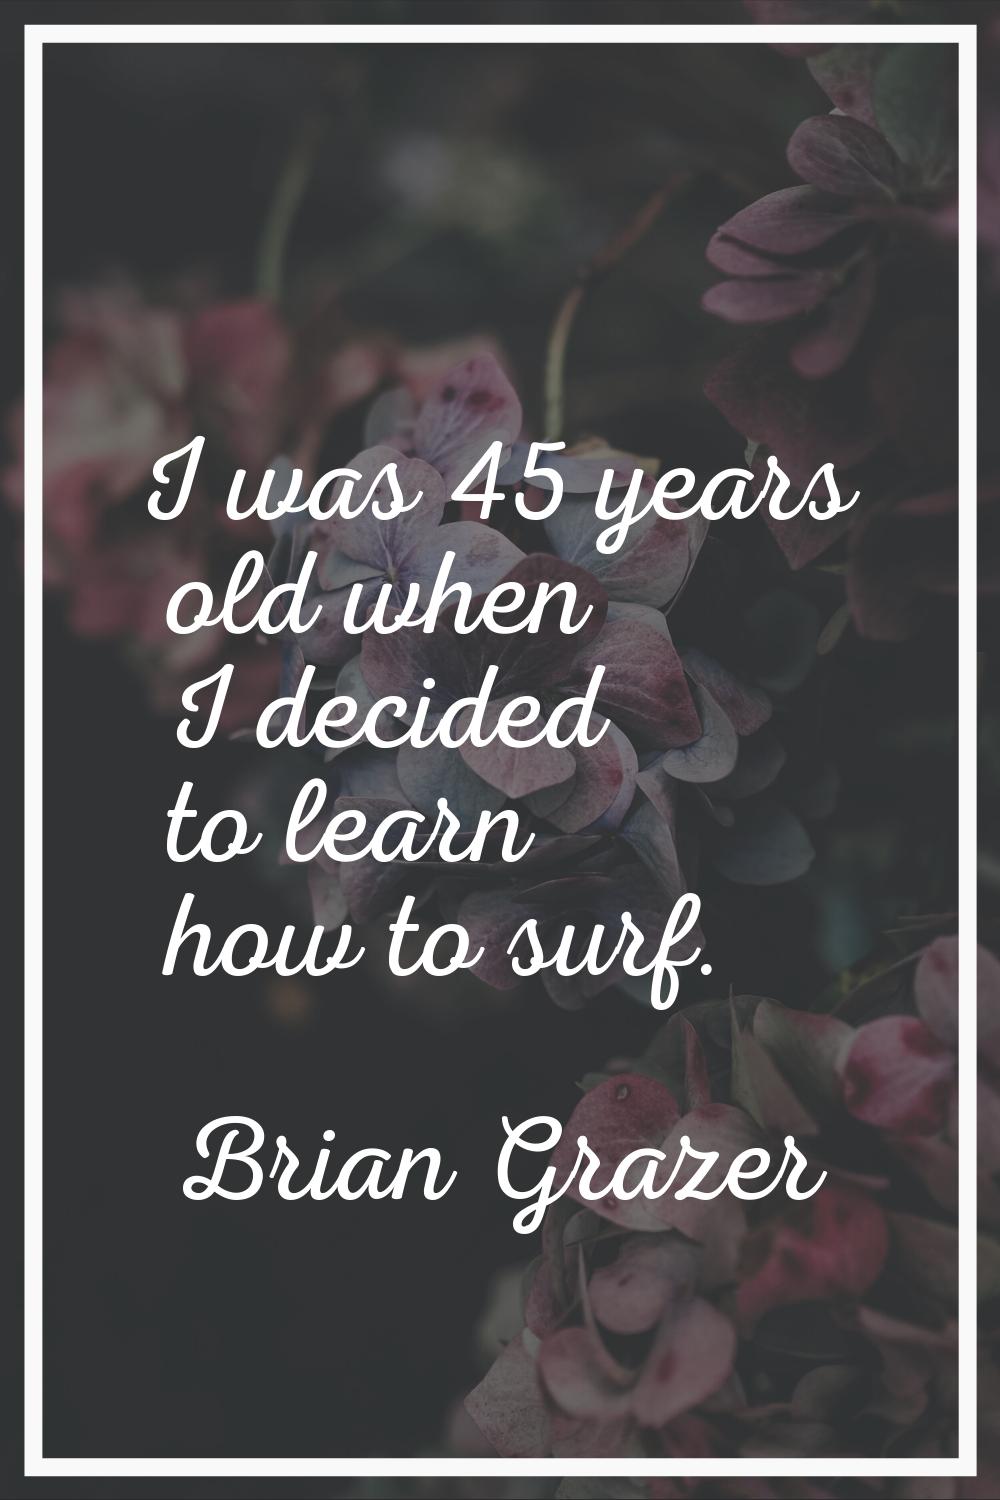 I was 45 years old when I decided to learn how to surf.